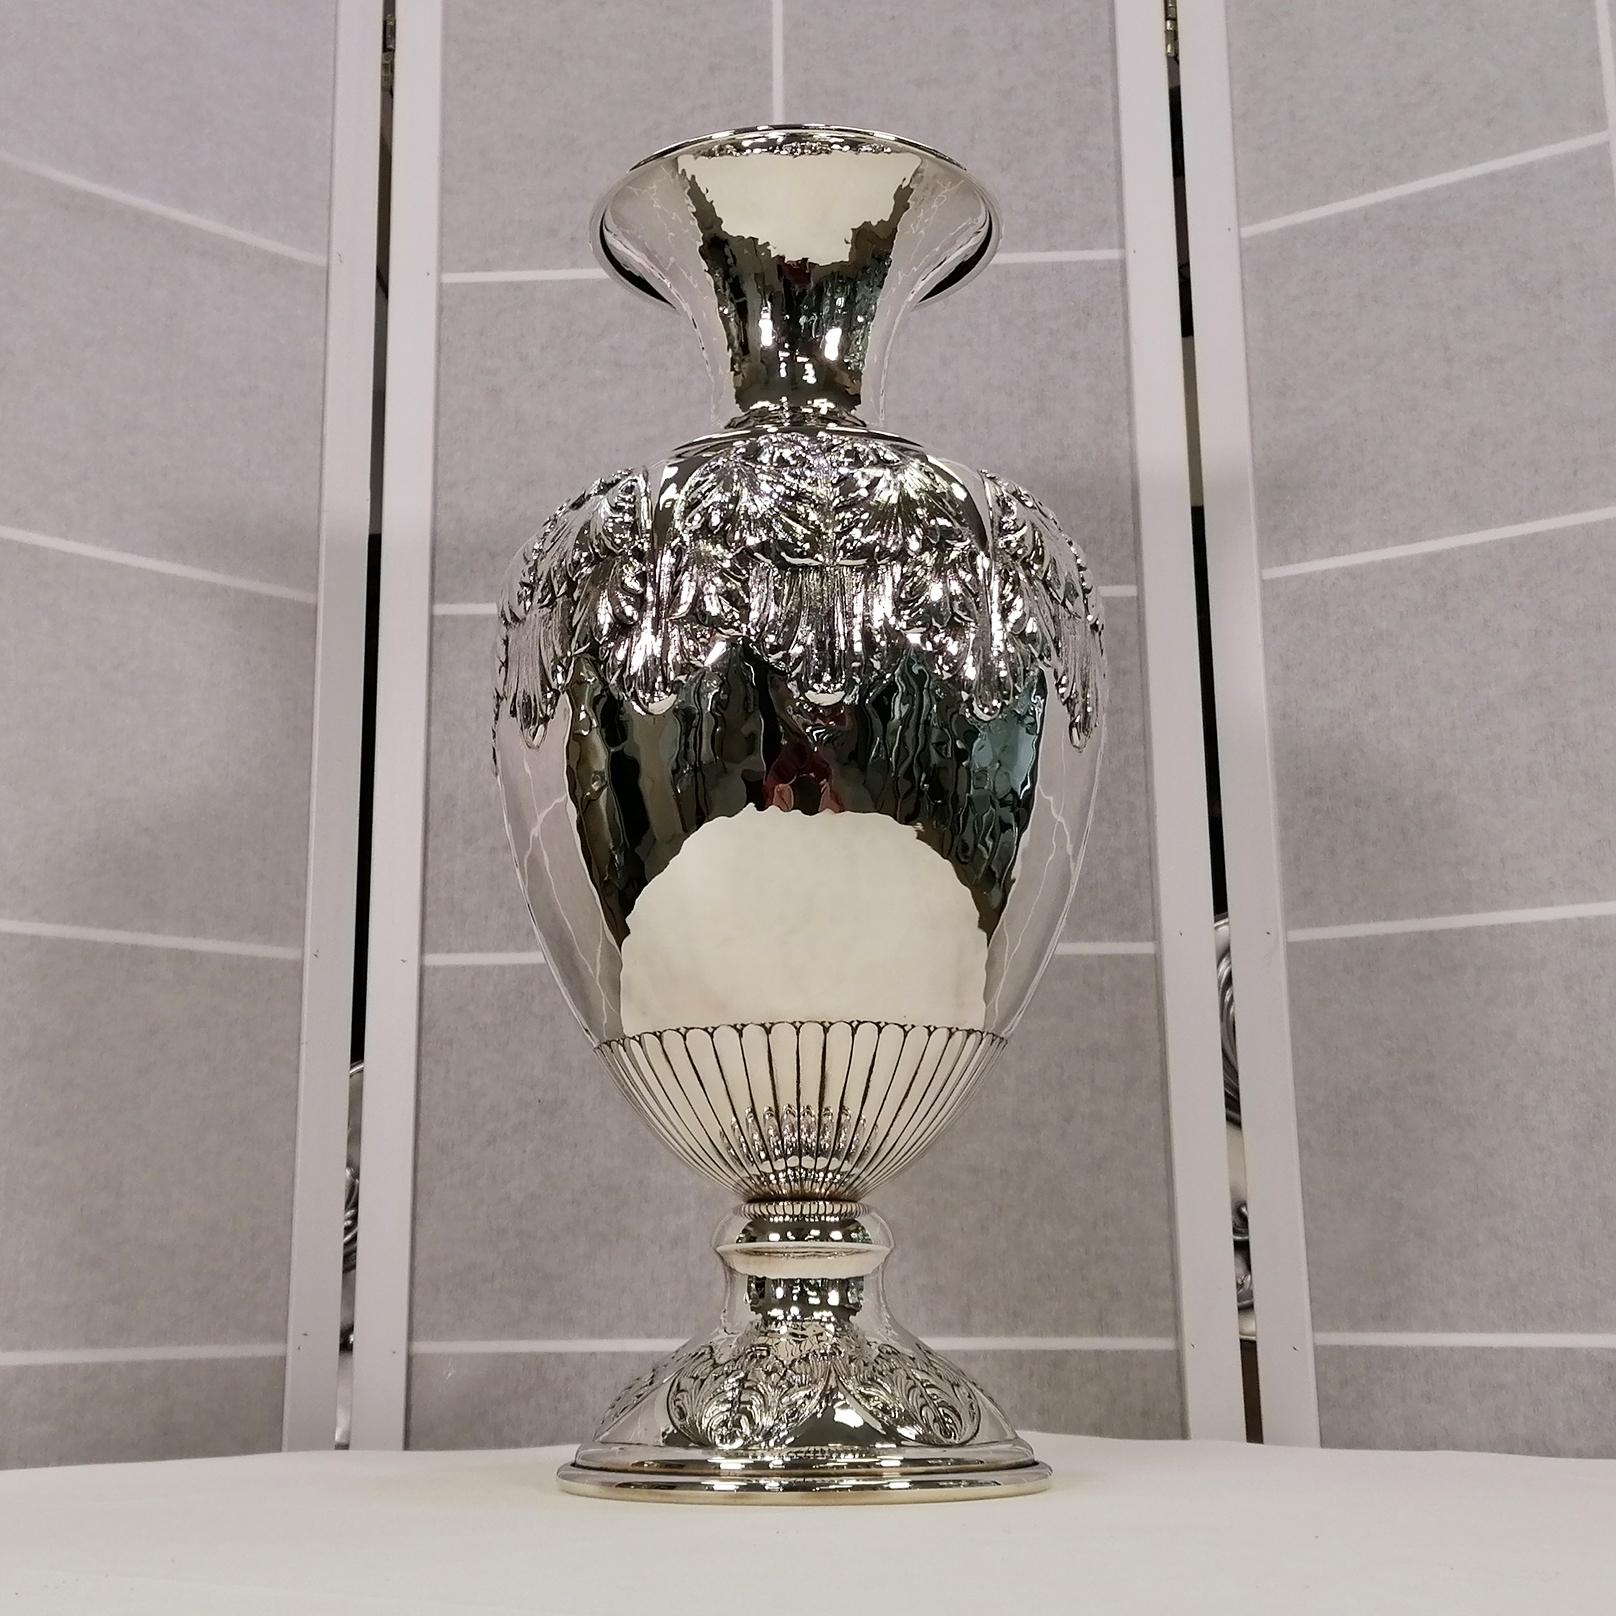 20th century Italian vase in 925 sterling silver.
Classic shaped vase made in 3 parts by padding a sterling silver plate and subsequently assembled.
A hand-embossed acanthus leaf design was made on both the body of the vase and the base.
A fluted